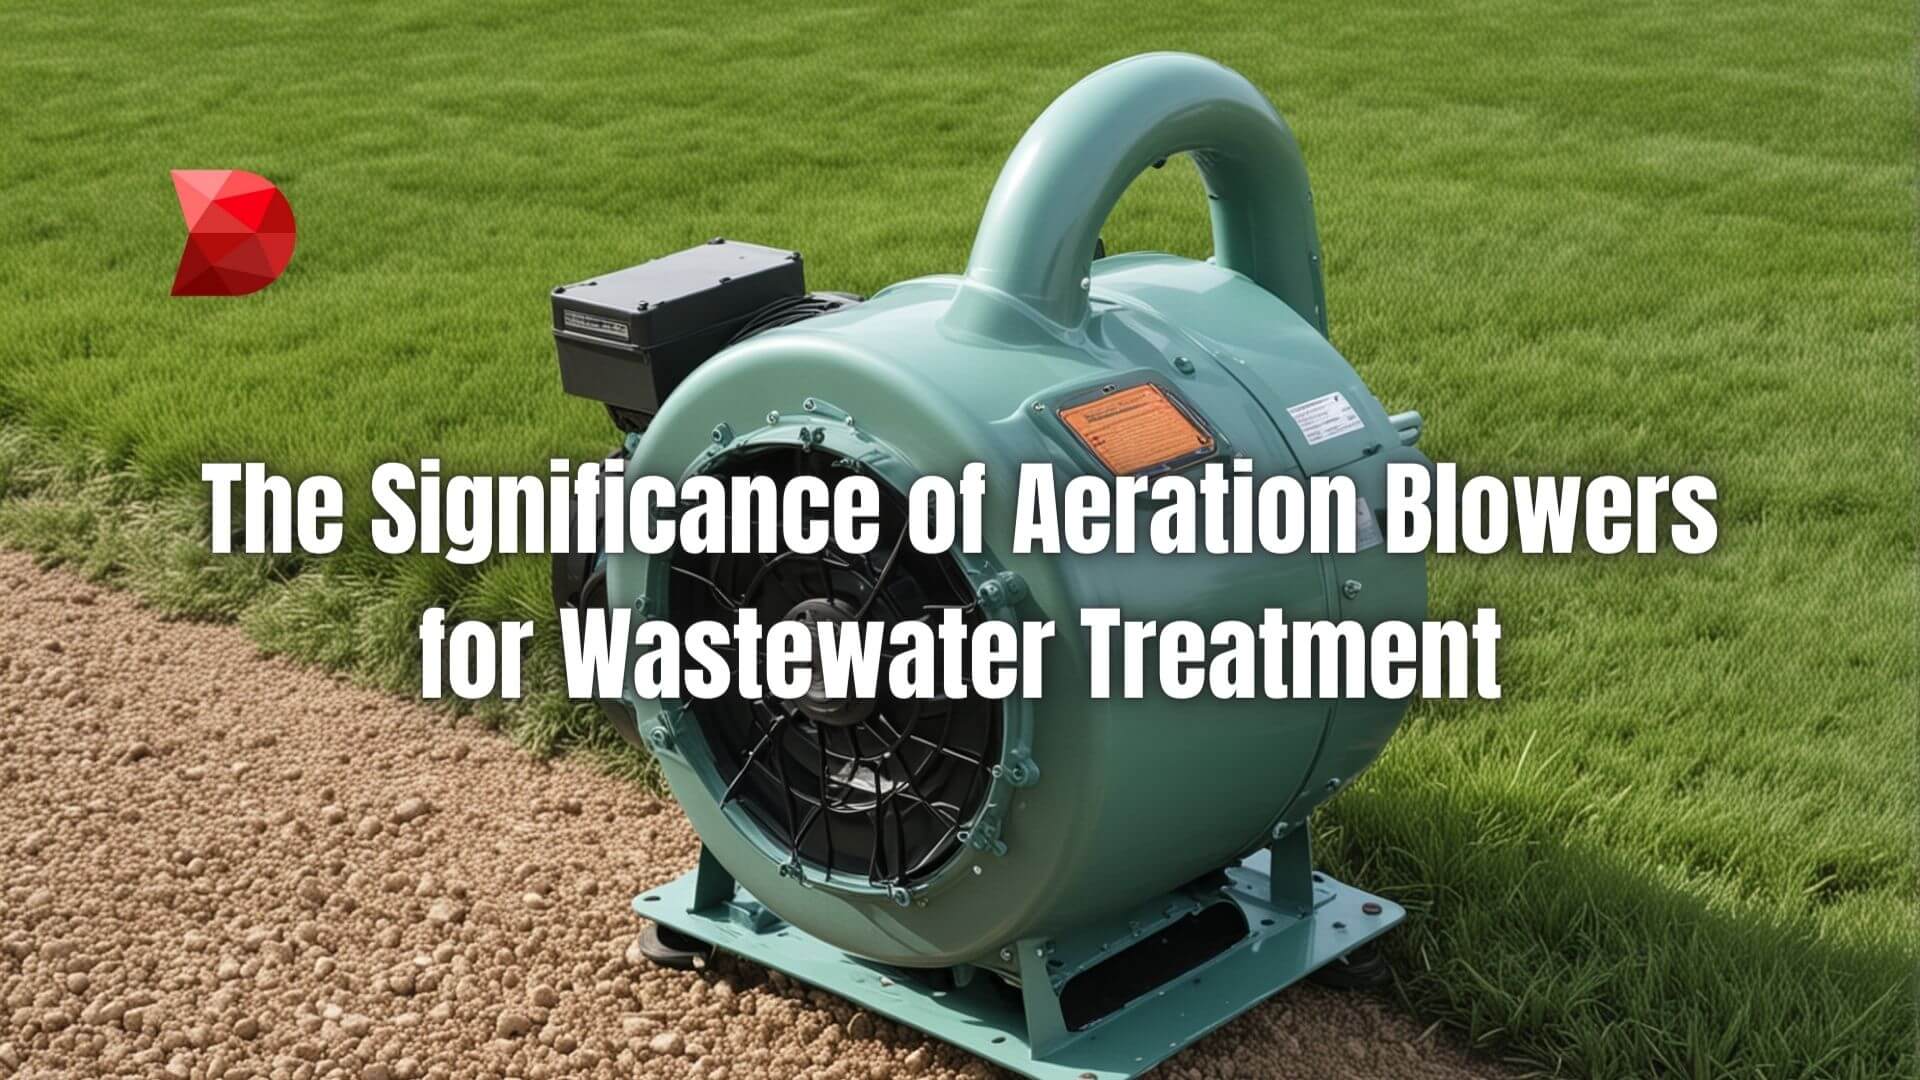 Unlock the secrets of an aeration blower in wastewater treatment. Click here to learn why they're vital for efficient purification processes!